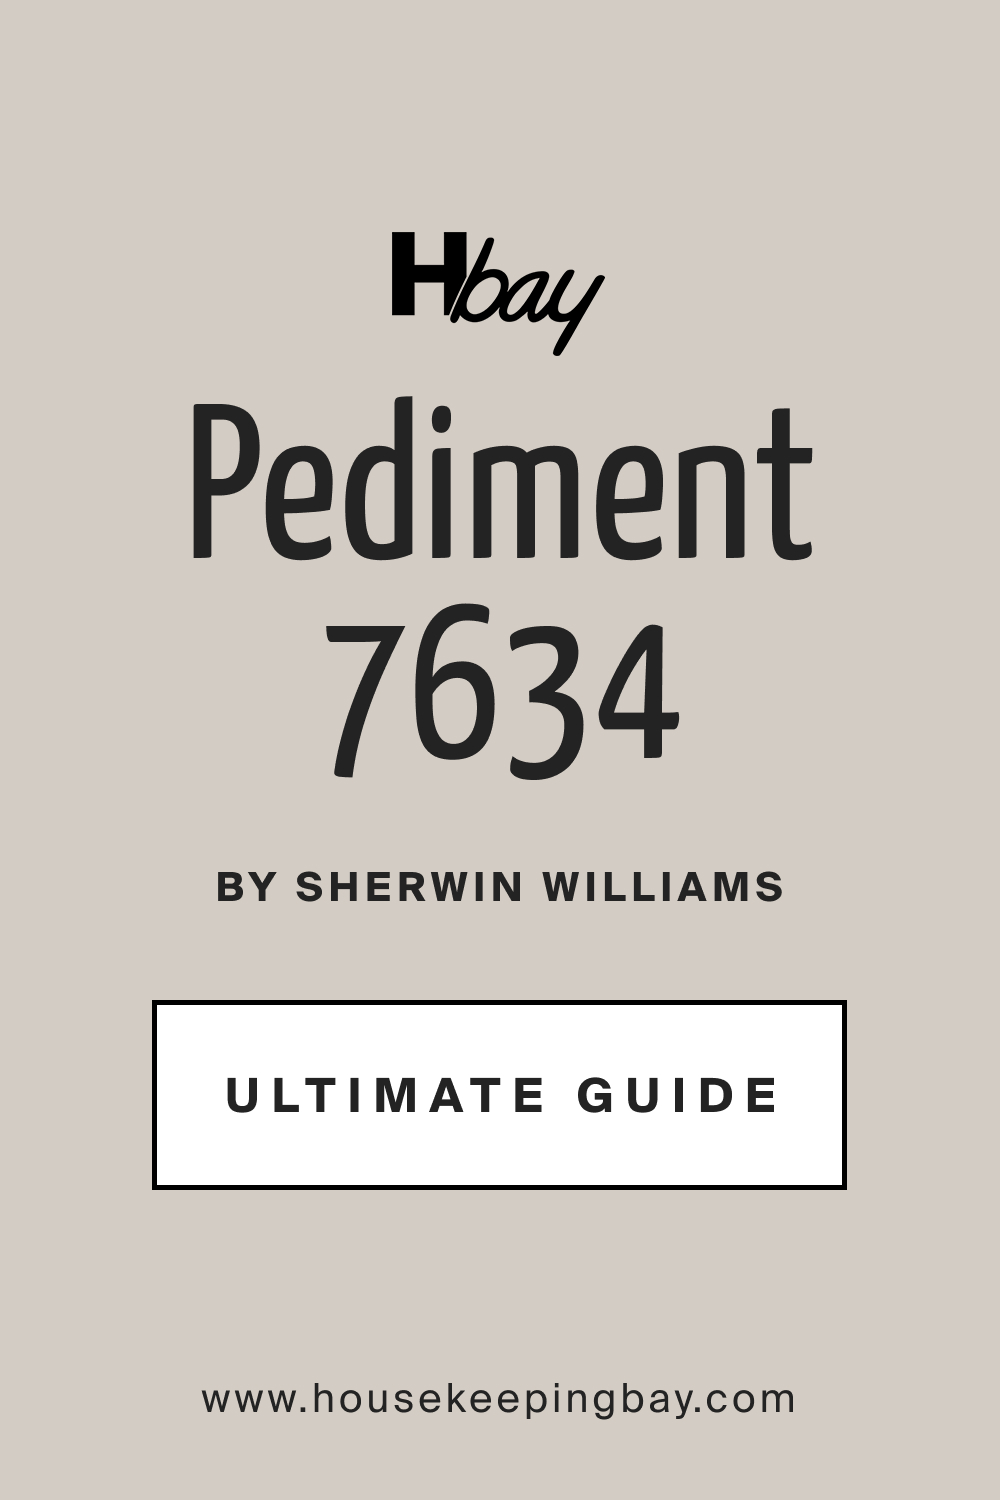 Pediment SW 7634 by Sherwin Williams Ultimate Guide